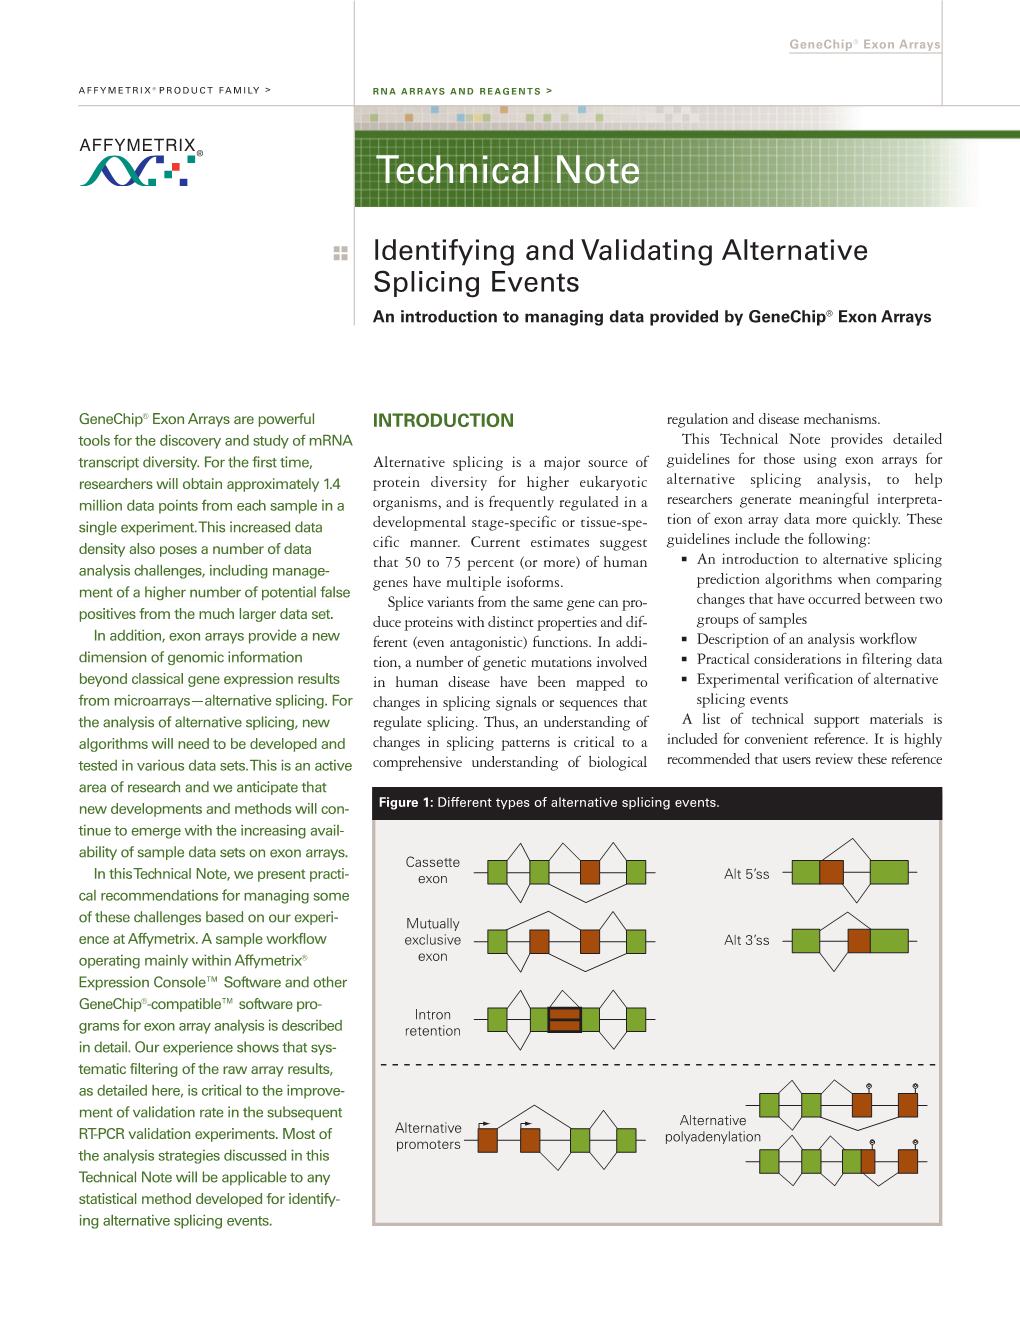 Identifying and Validating Alternative Splicing Events an Introduction to Managing Data Provided by Genechip® Exon Arrays